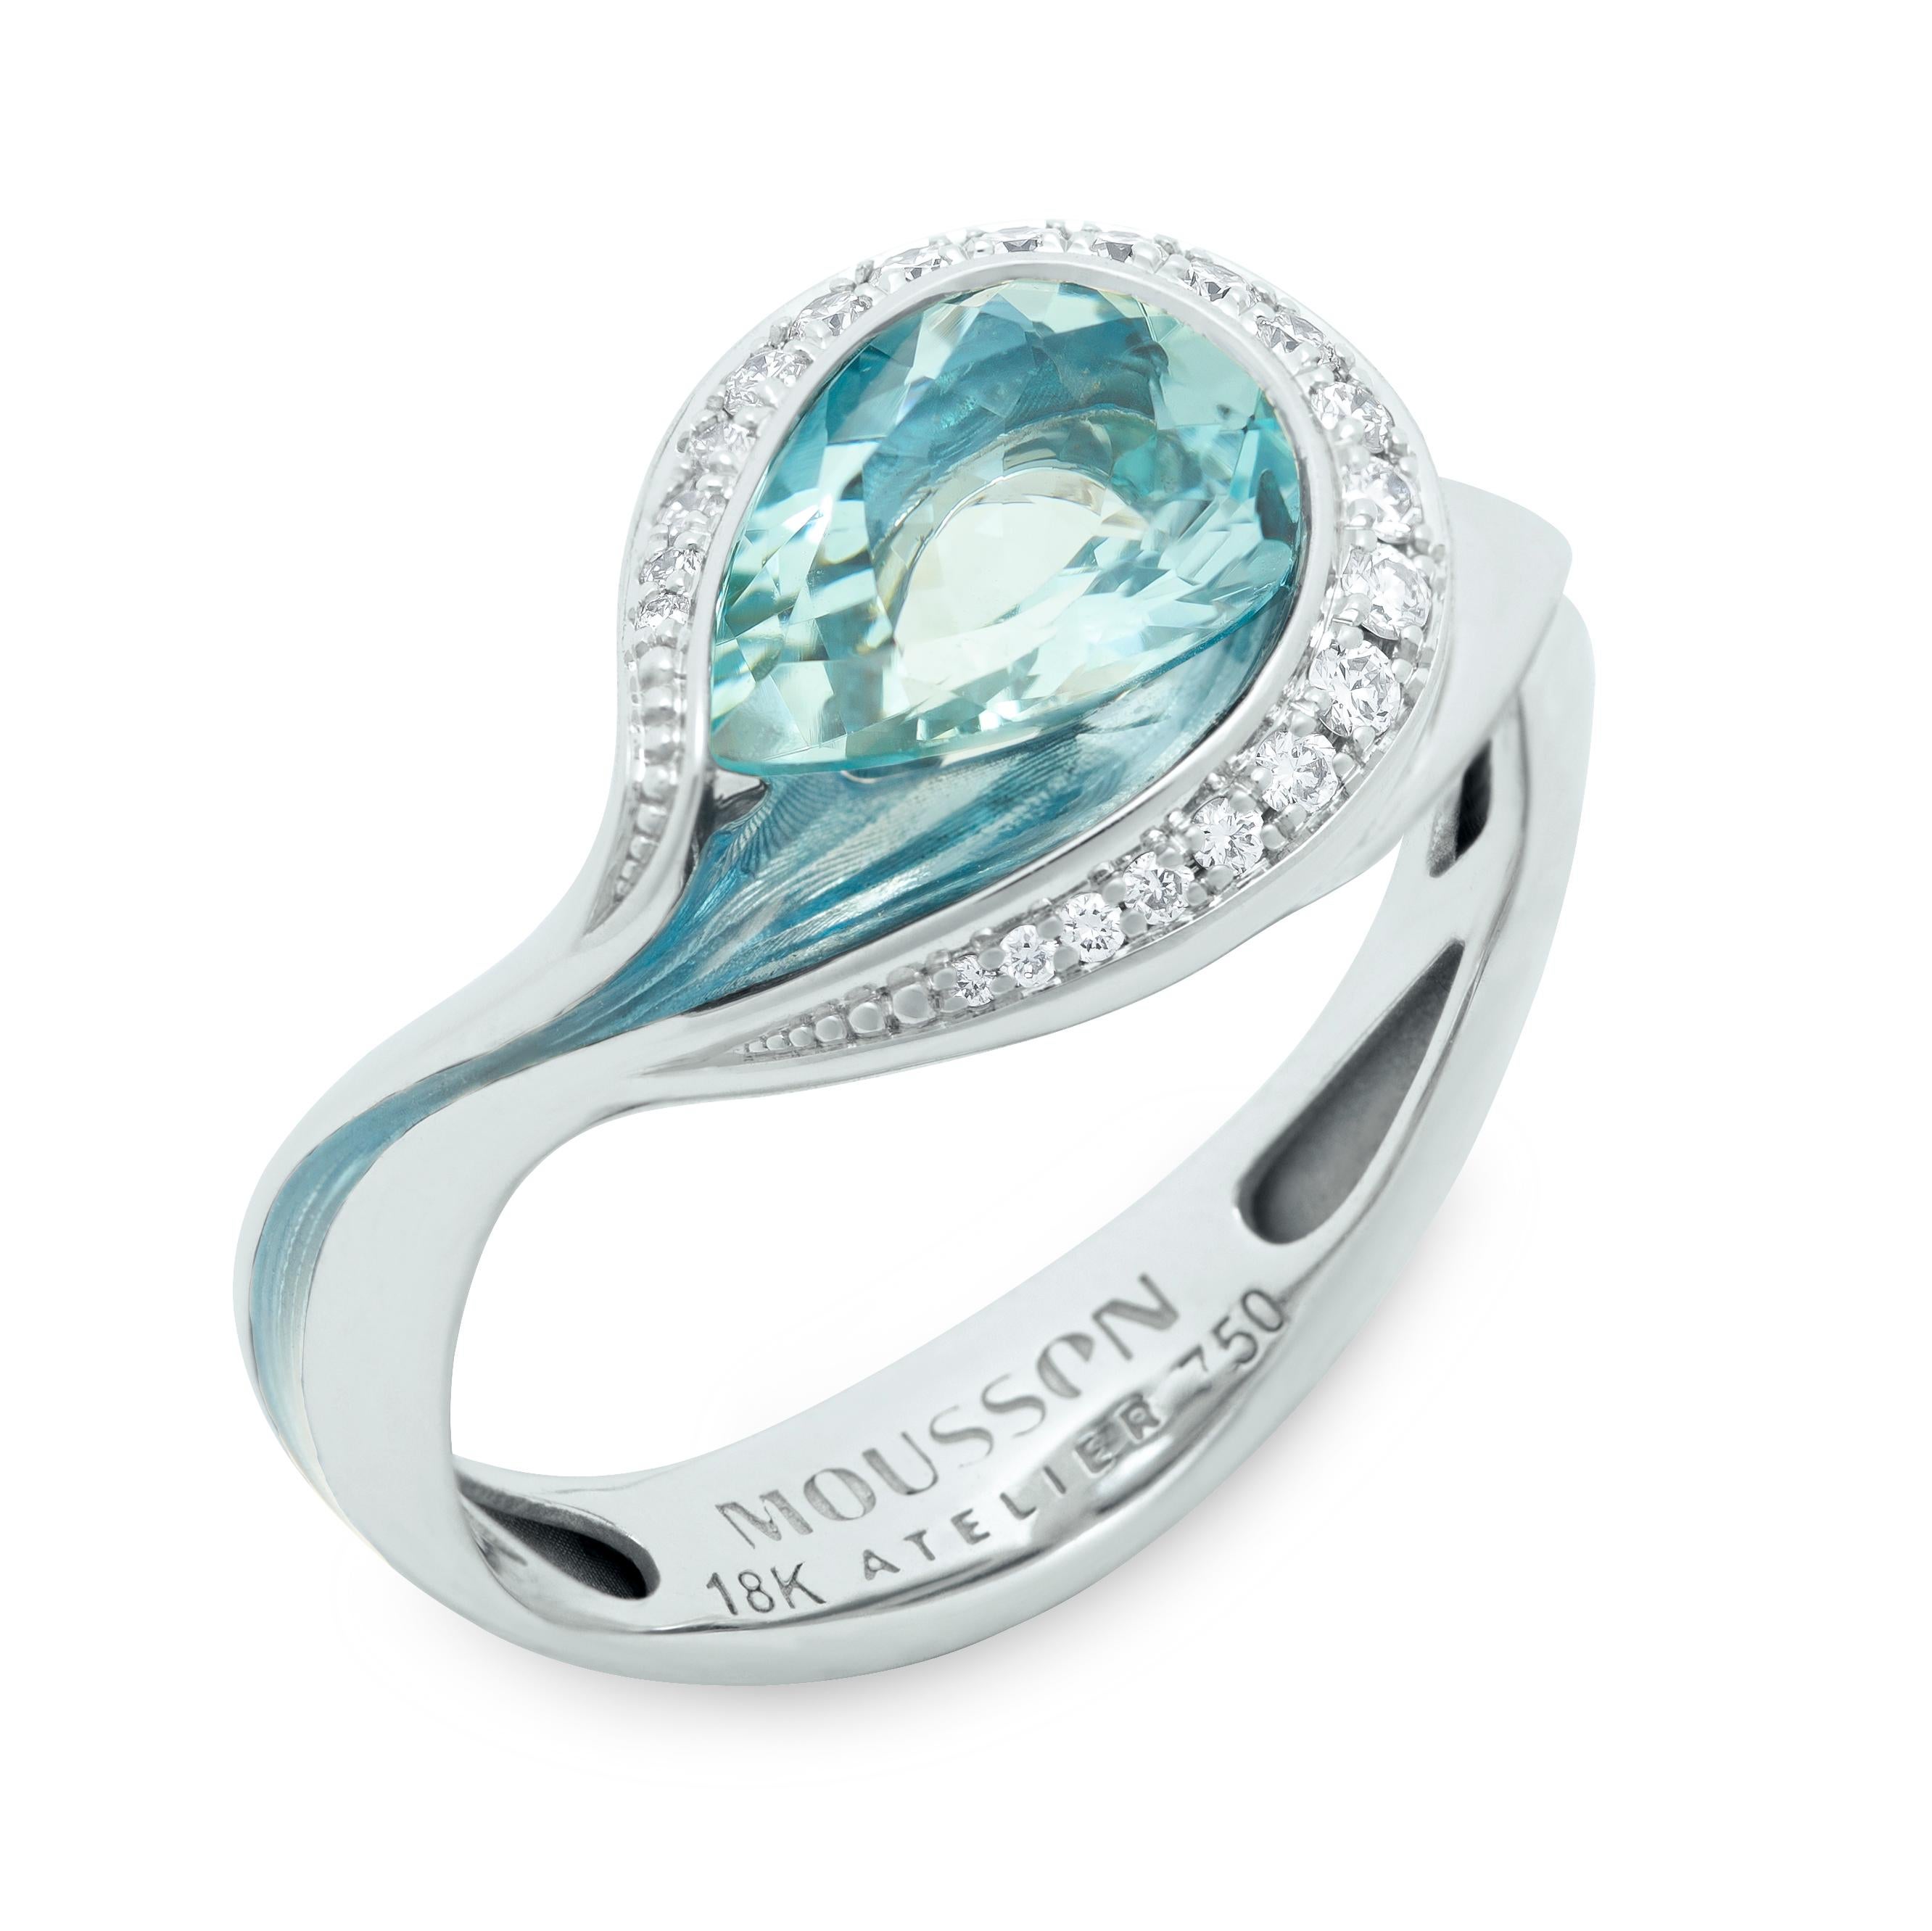 Aquamarine 1.48 Carat Diamonds Enamel 18 Karat White Gold Melted Colors Ring
Enamel here seems to be spreading along the ring from the center down the shank, which reminds us of the name of the collection 